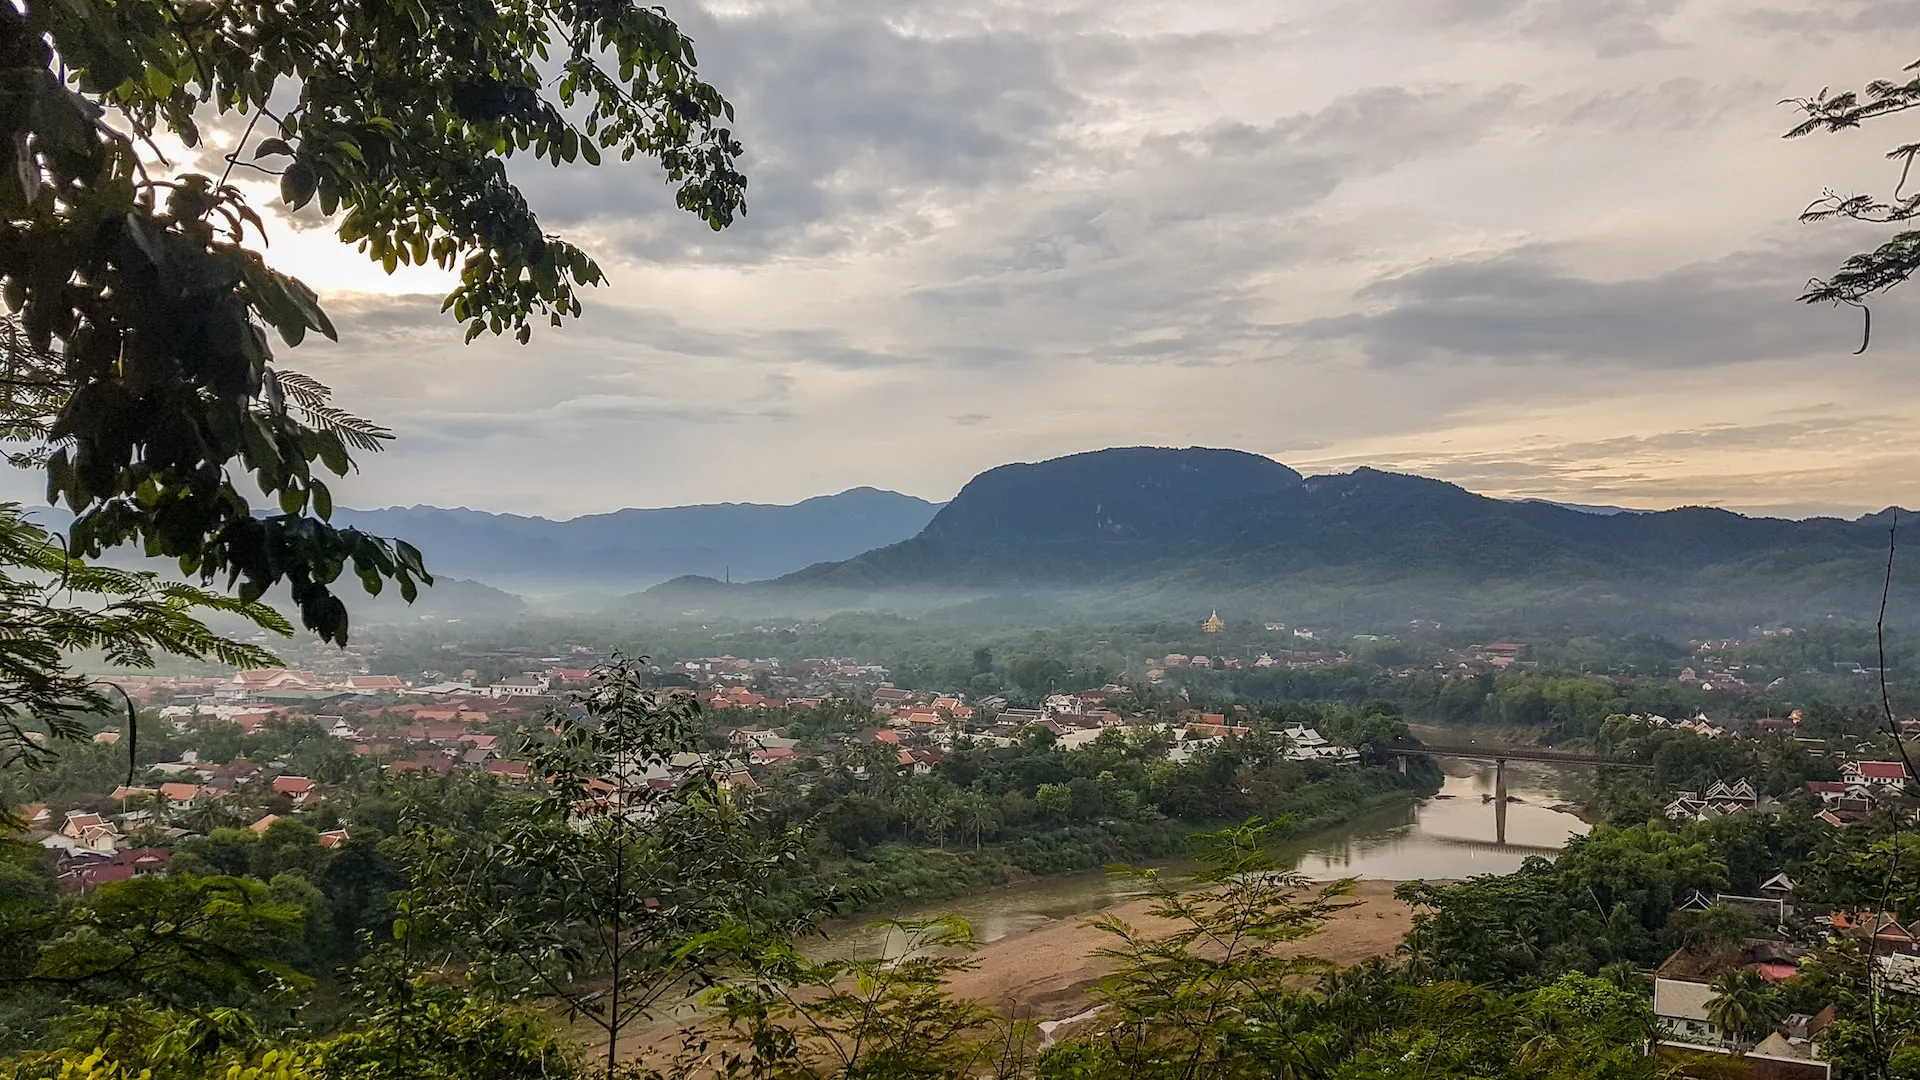 Aerial view of Luang Prabang. Source: Photo by Colin Roe on Unsplash